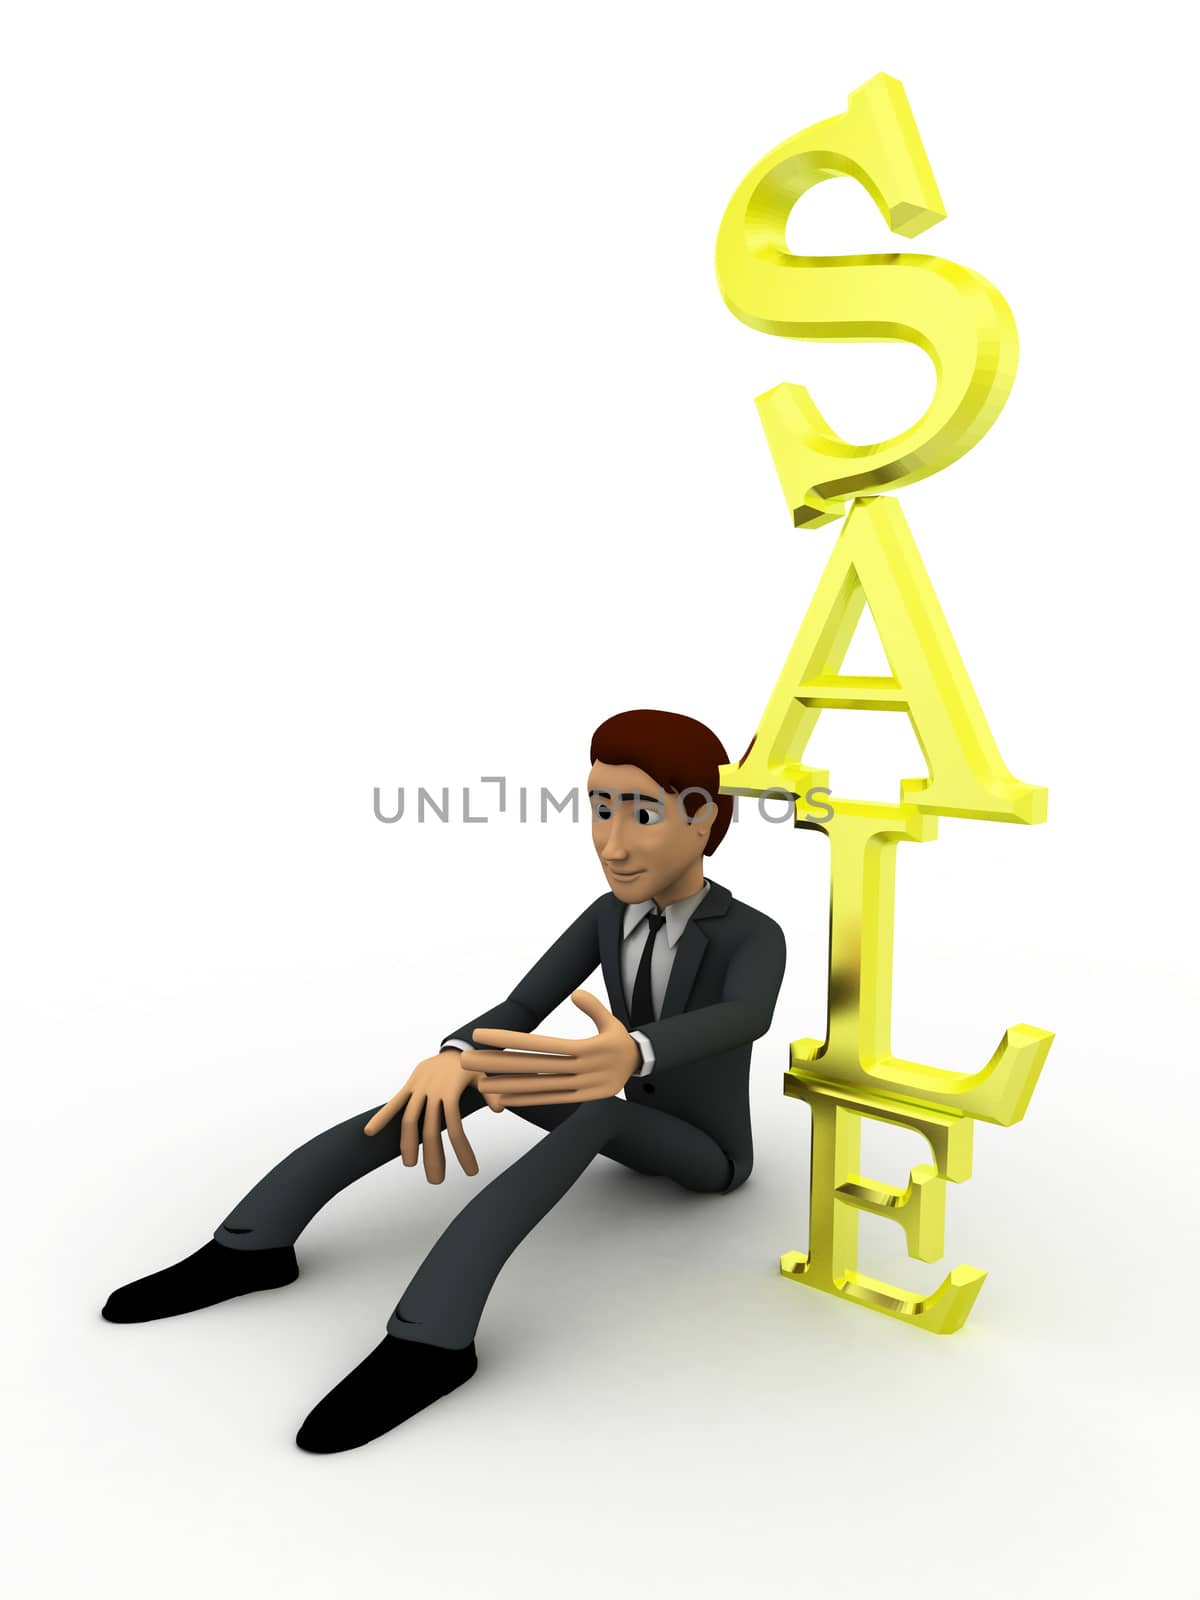 3d man sitting beside vertical sale text concept on white background, side angle view